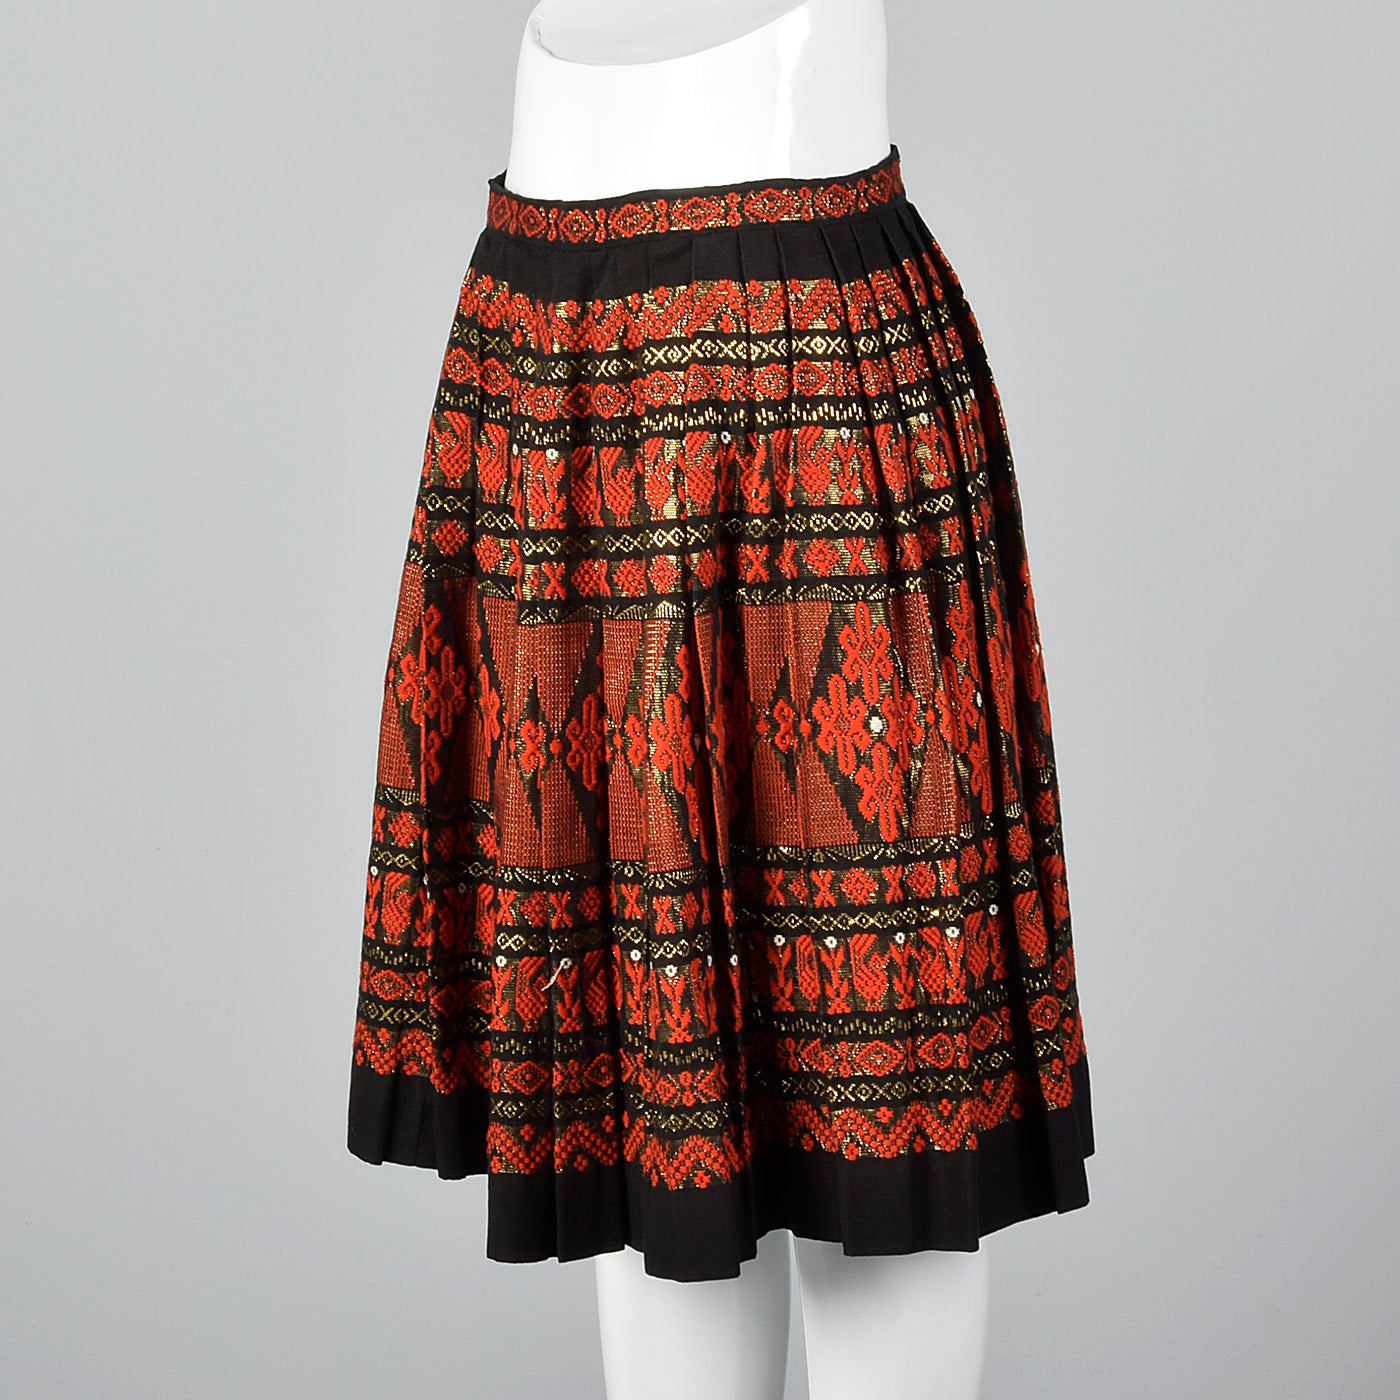 1950s Pleated Black Skirt with Red and Metallic Embroidery